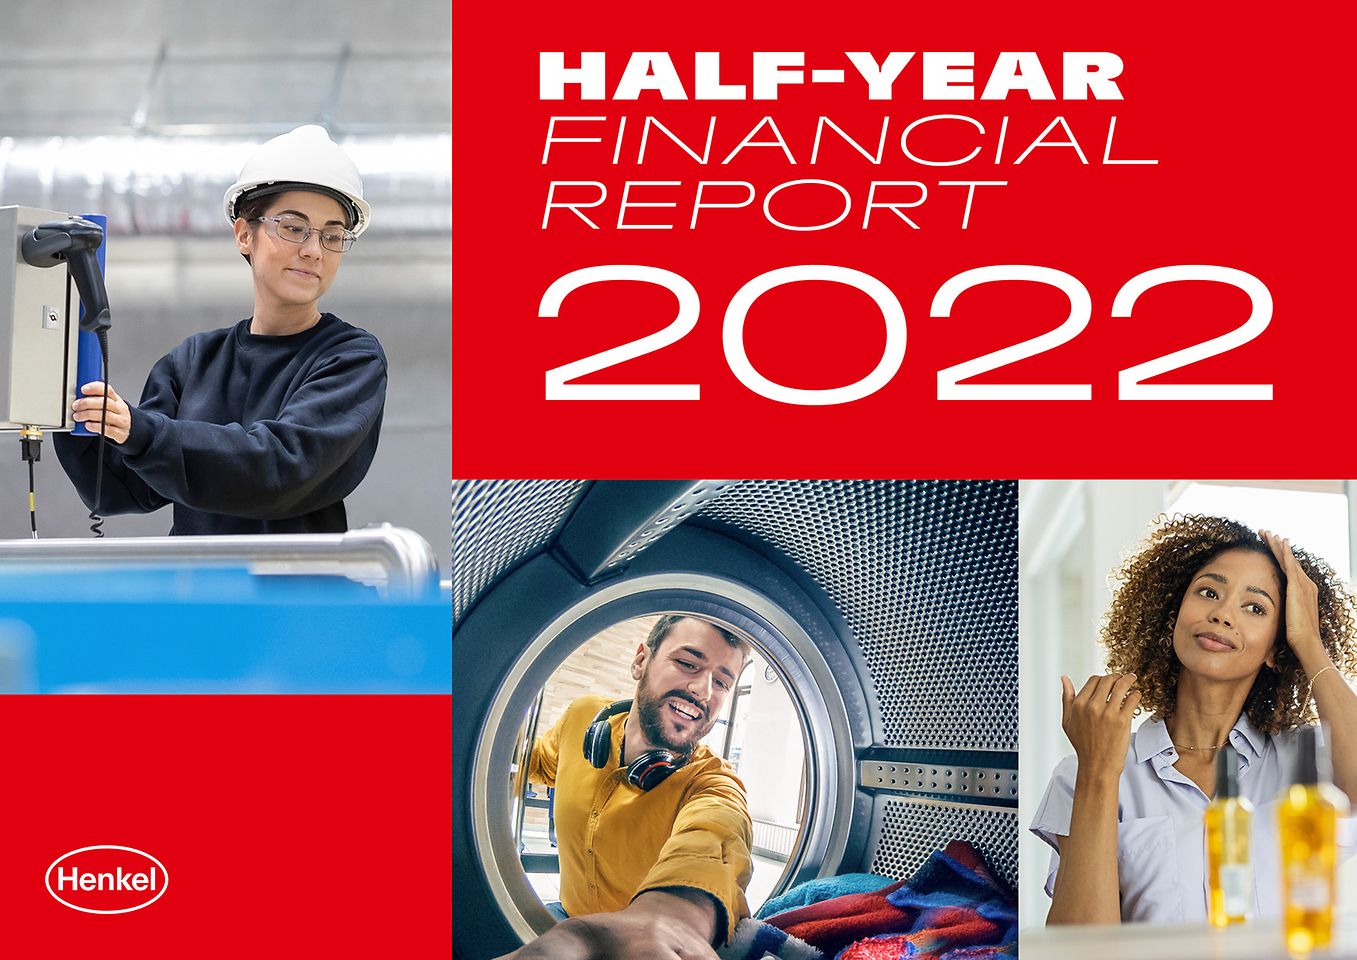 2022 Half-Year Financial Report Cover